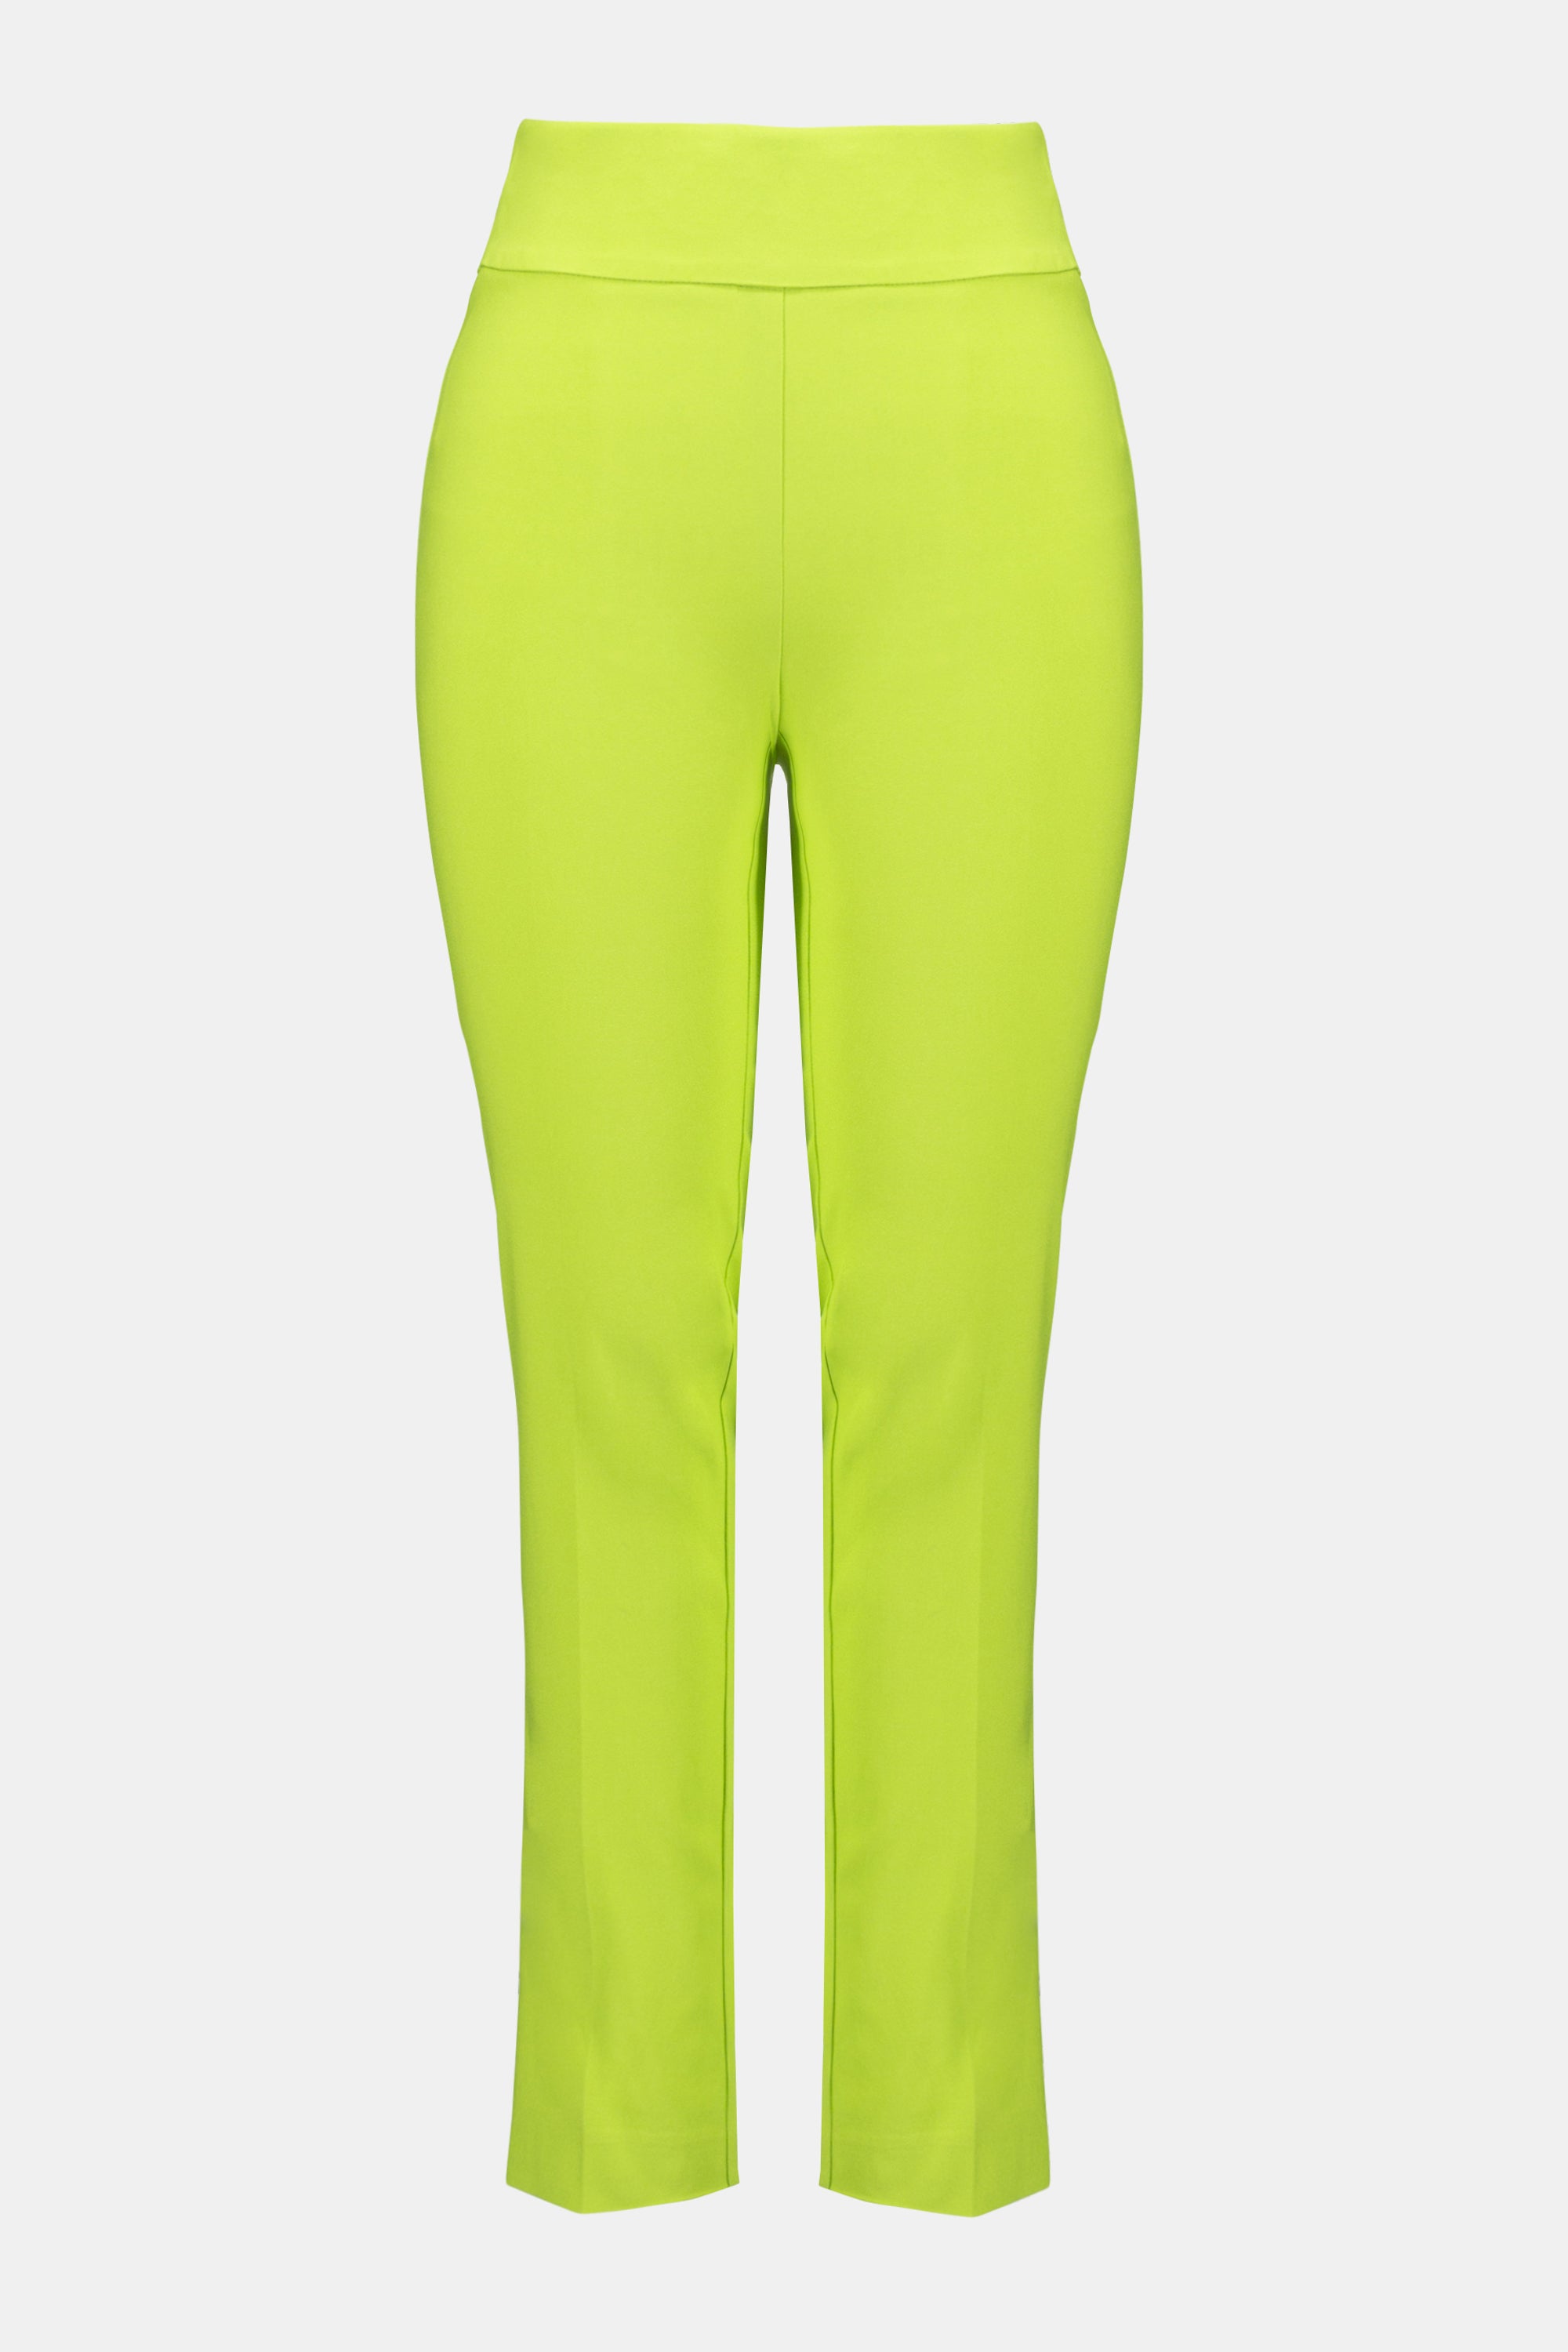 7/8 Lime Trousers - 201483